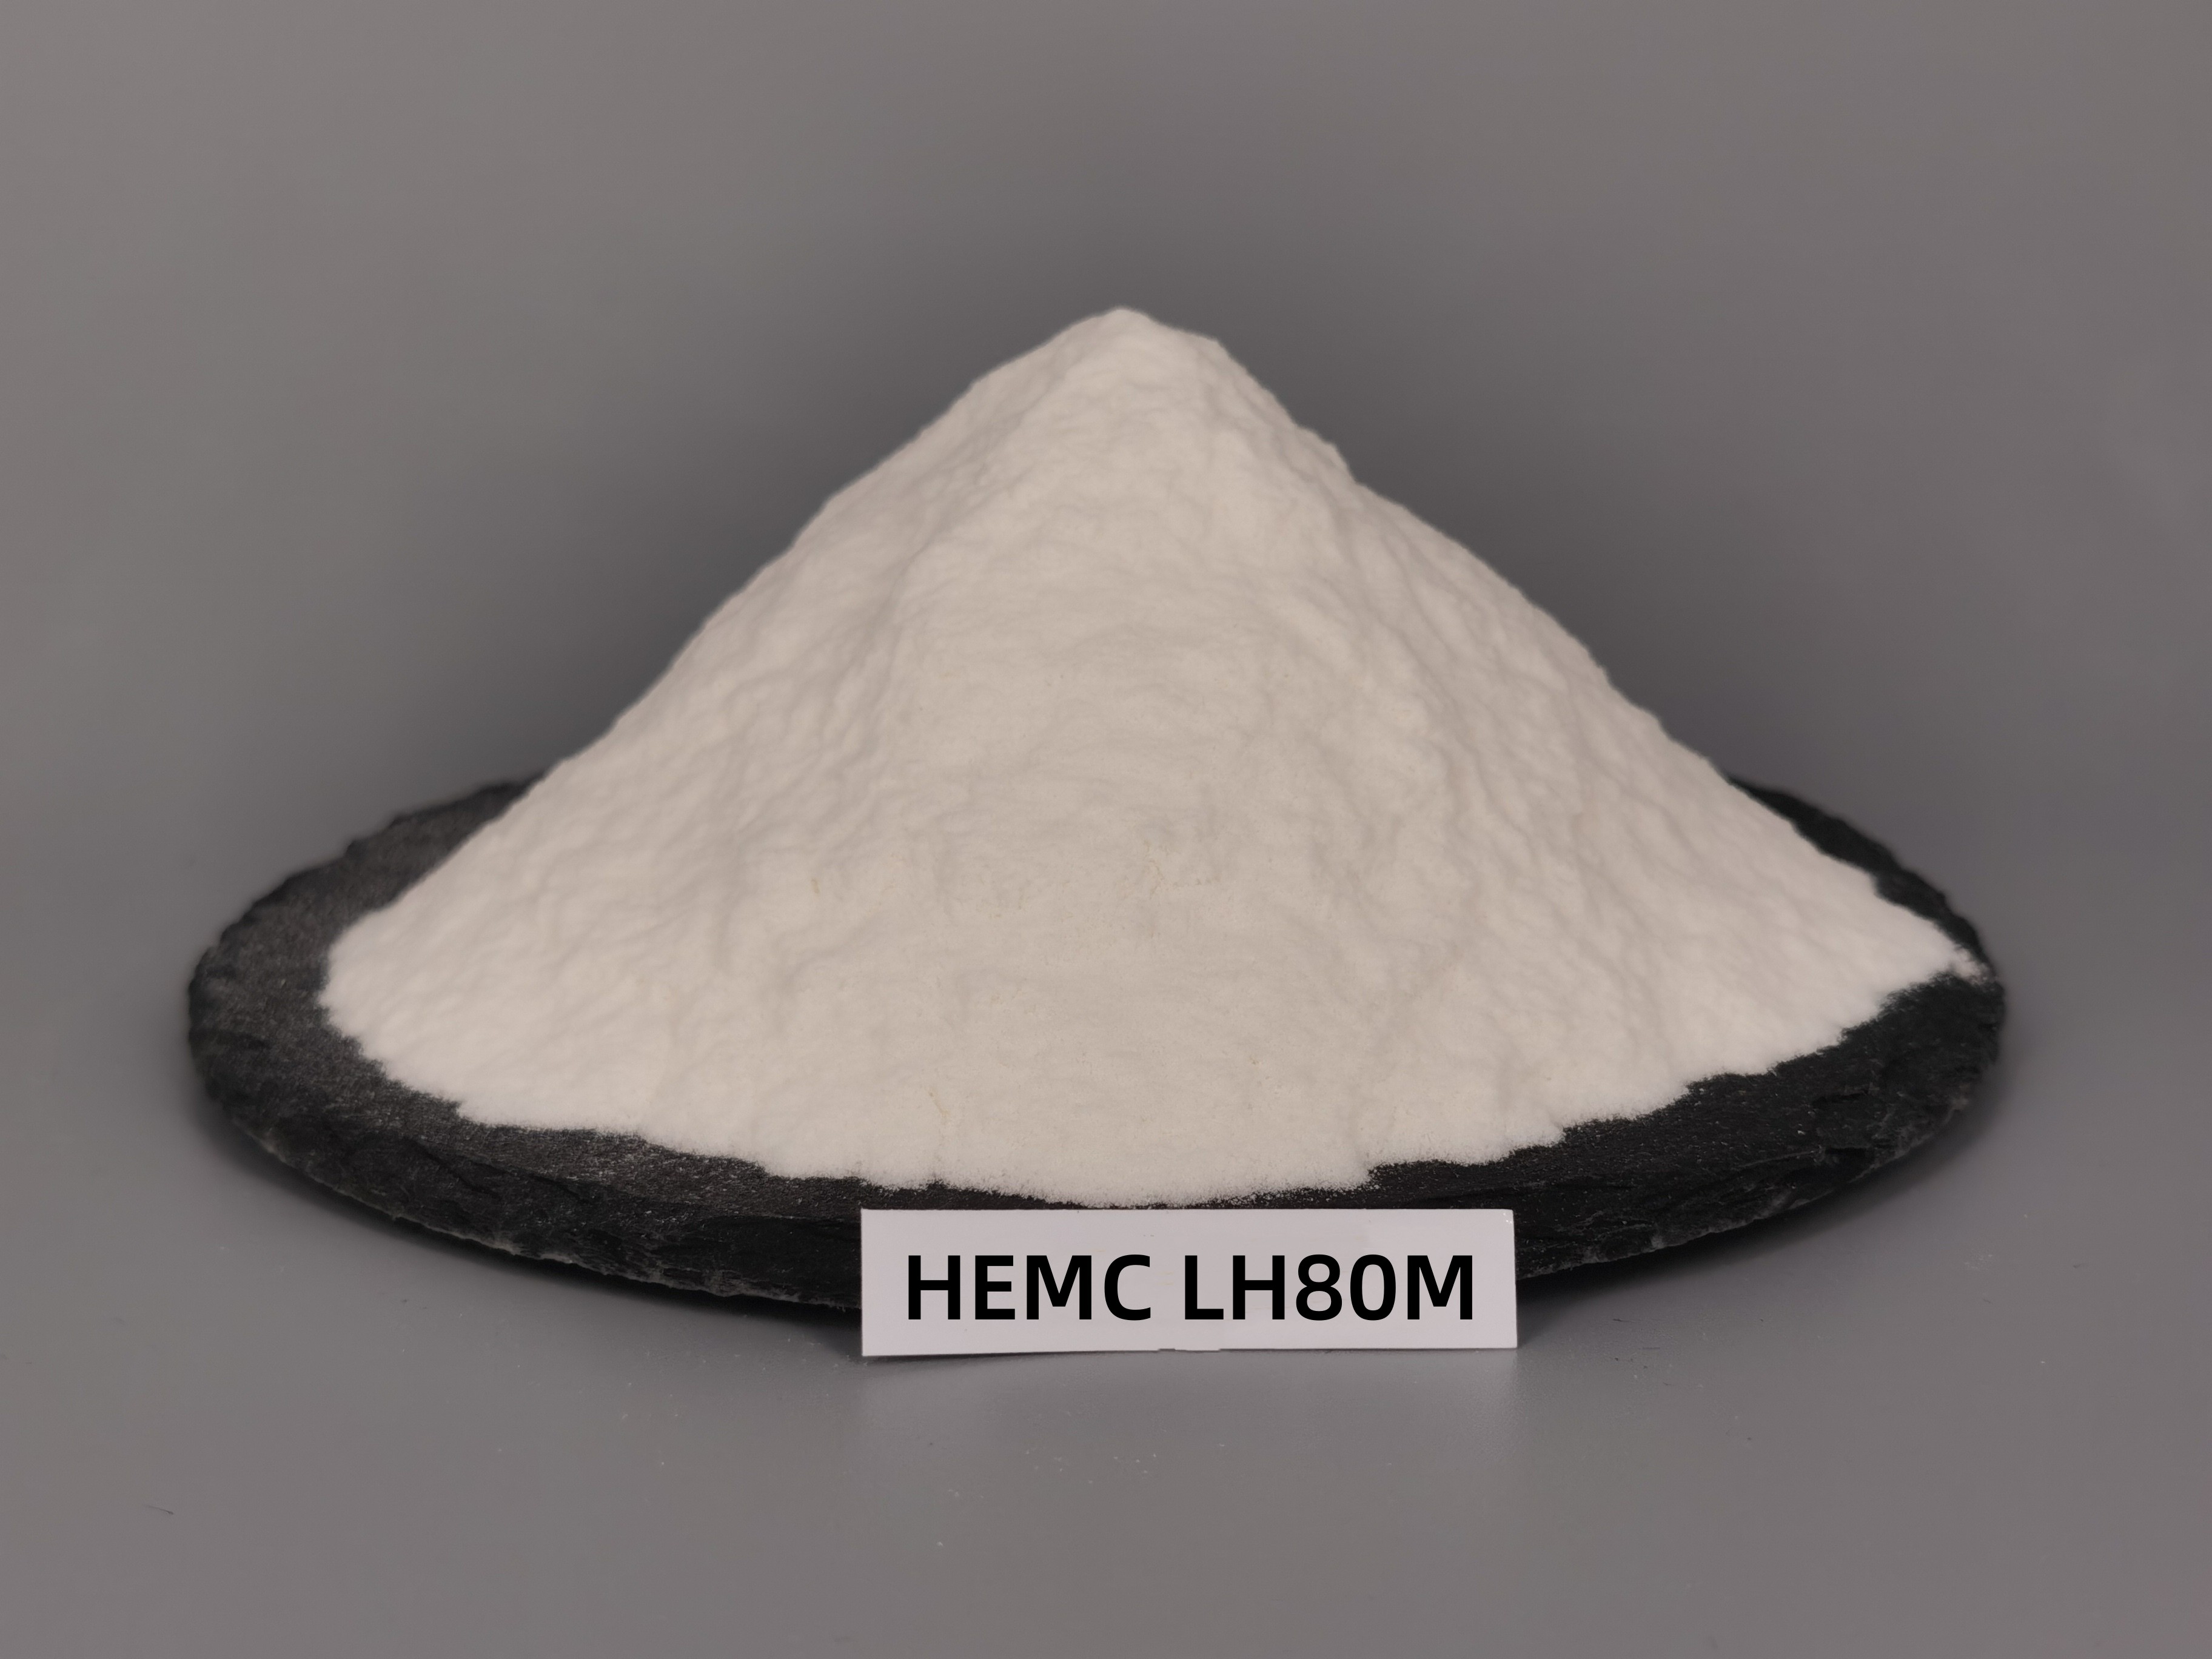 https://www.longouchem.com/hpmc-lk50m-factory-supply-high-quality-cellulose-ether-product/